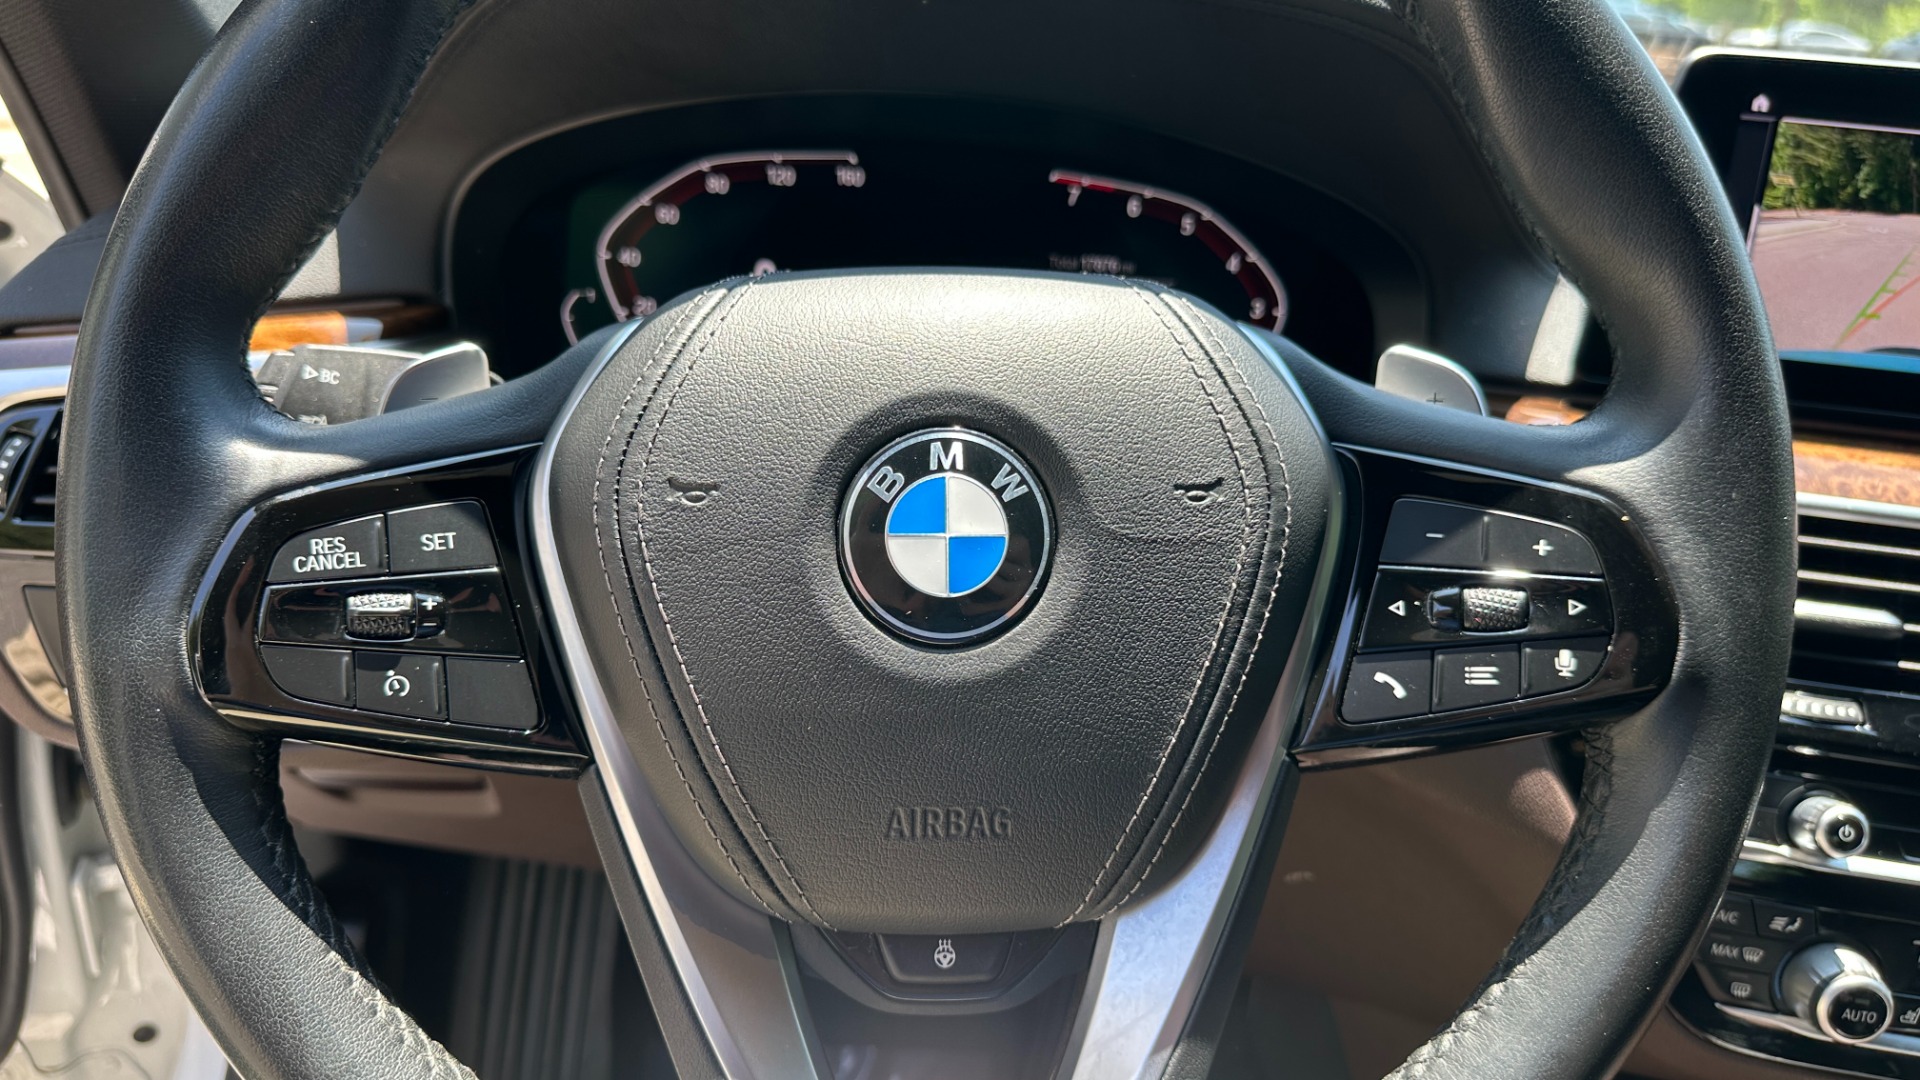 Used 2020 BMW 5 Series 540i xDrive / EXECUTIVE / LUXURY / HK SURROUND / NAPPA LEATHER for sale $45,995 at Formula Imports in Charlotte NC 28227 16